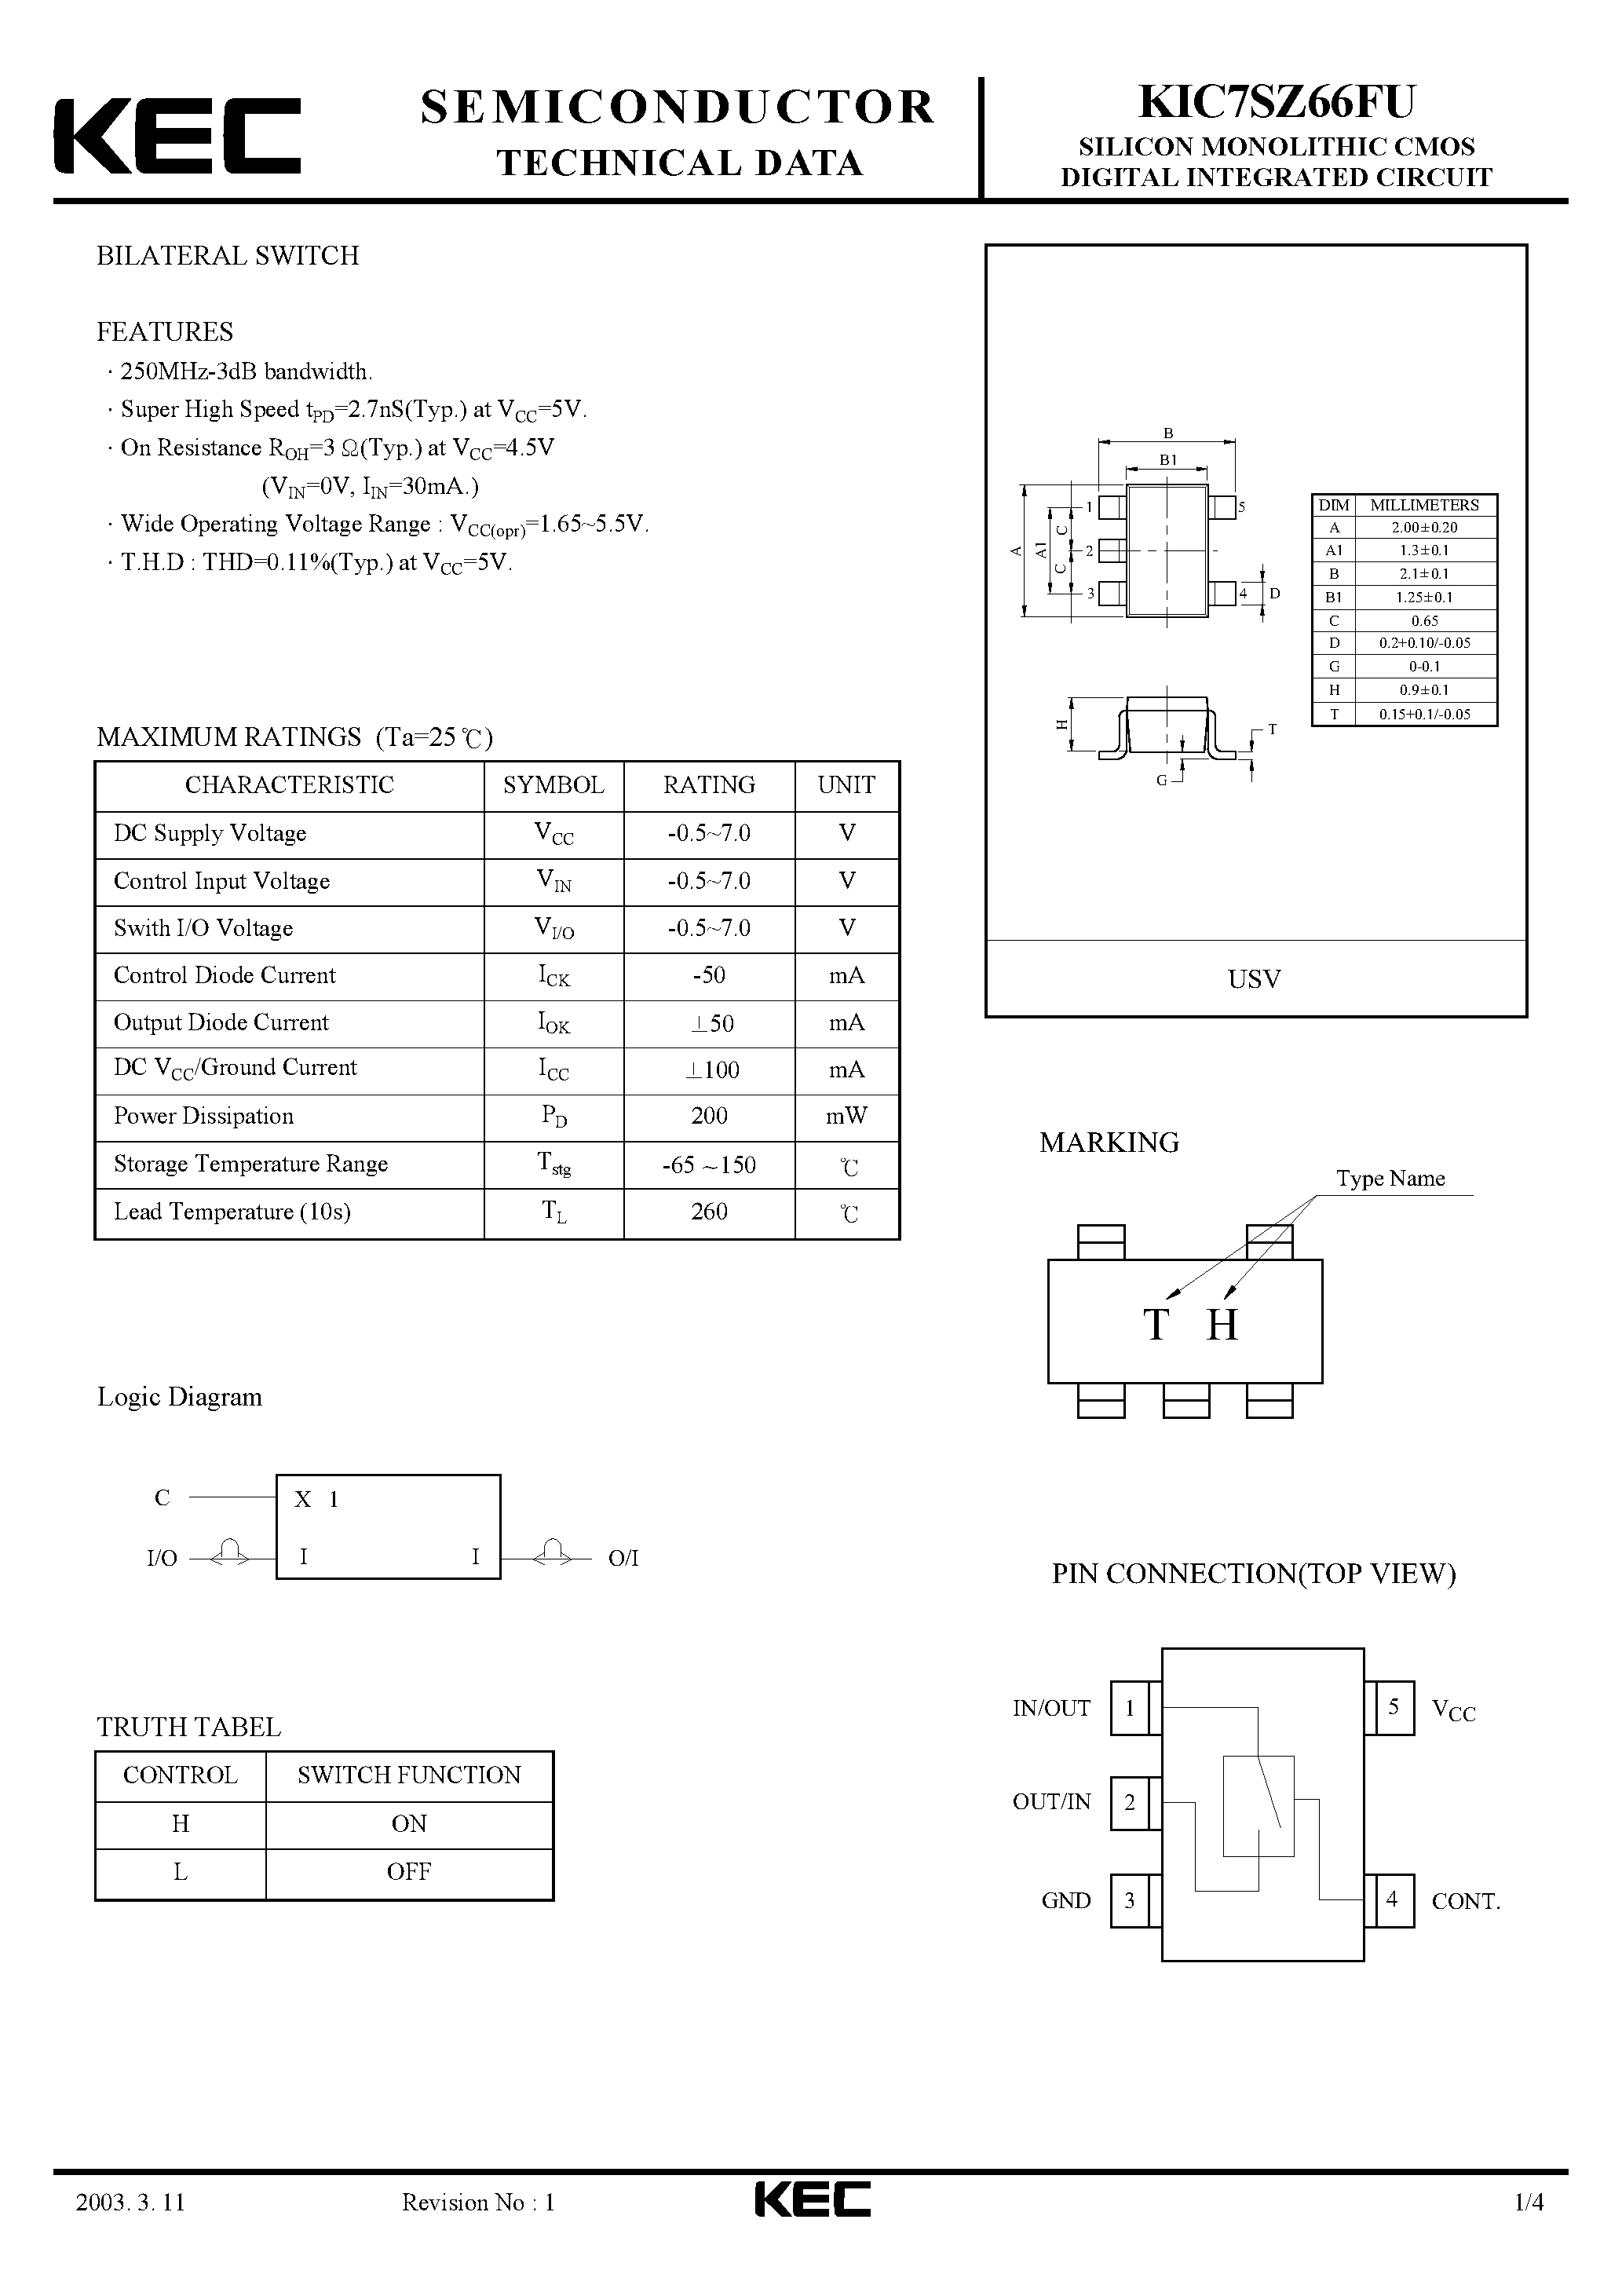 Datasheet KIC7SZ66FU - SILICON MONOLITHIC CMOS DIGITAL INTEGRATED CIRCUIT(BILATERAL SWITCH) page 1